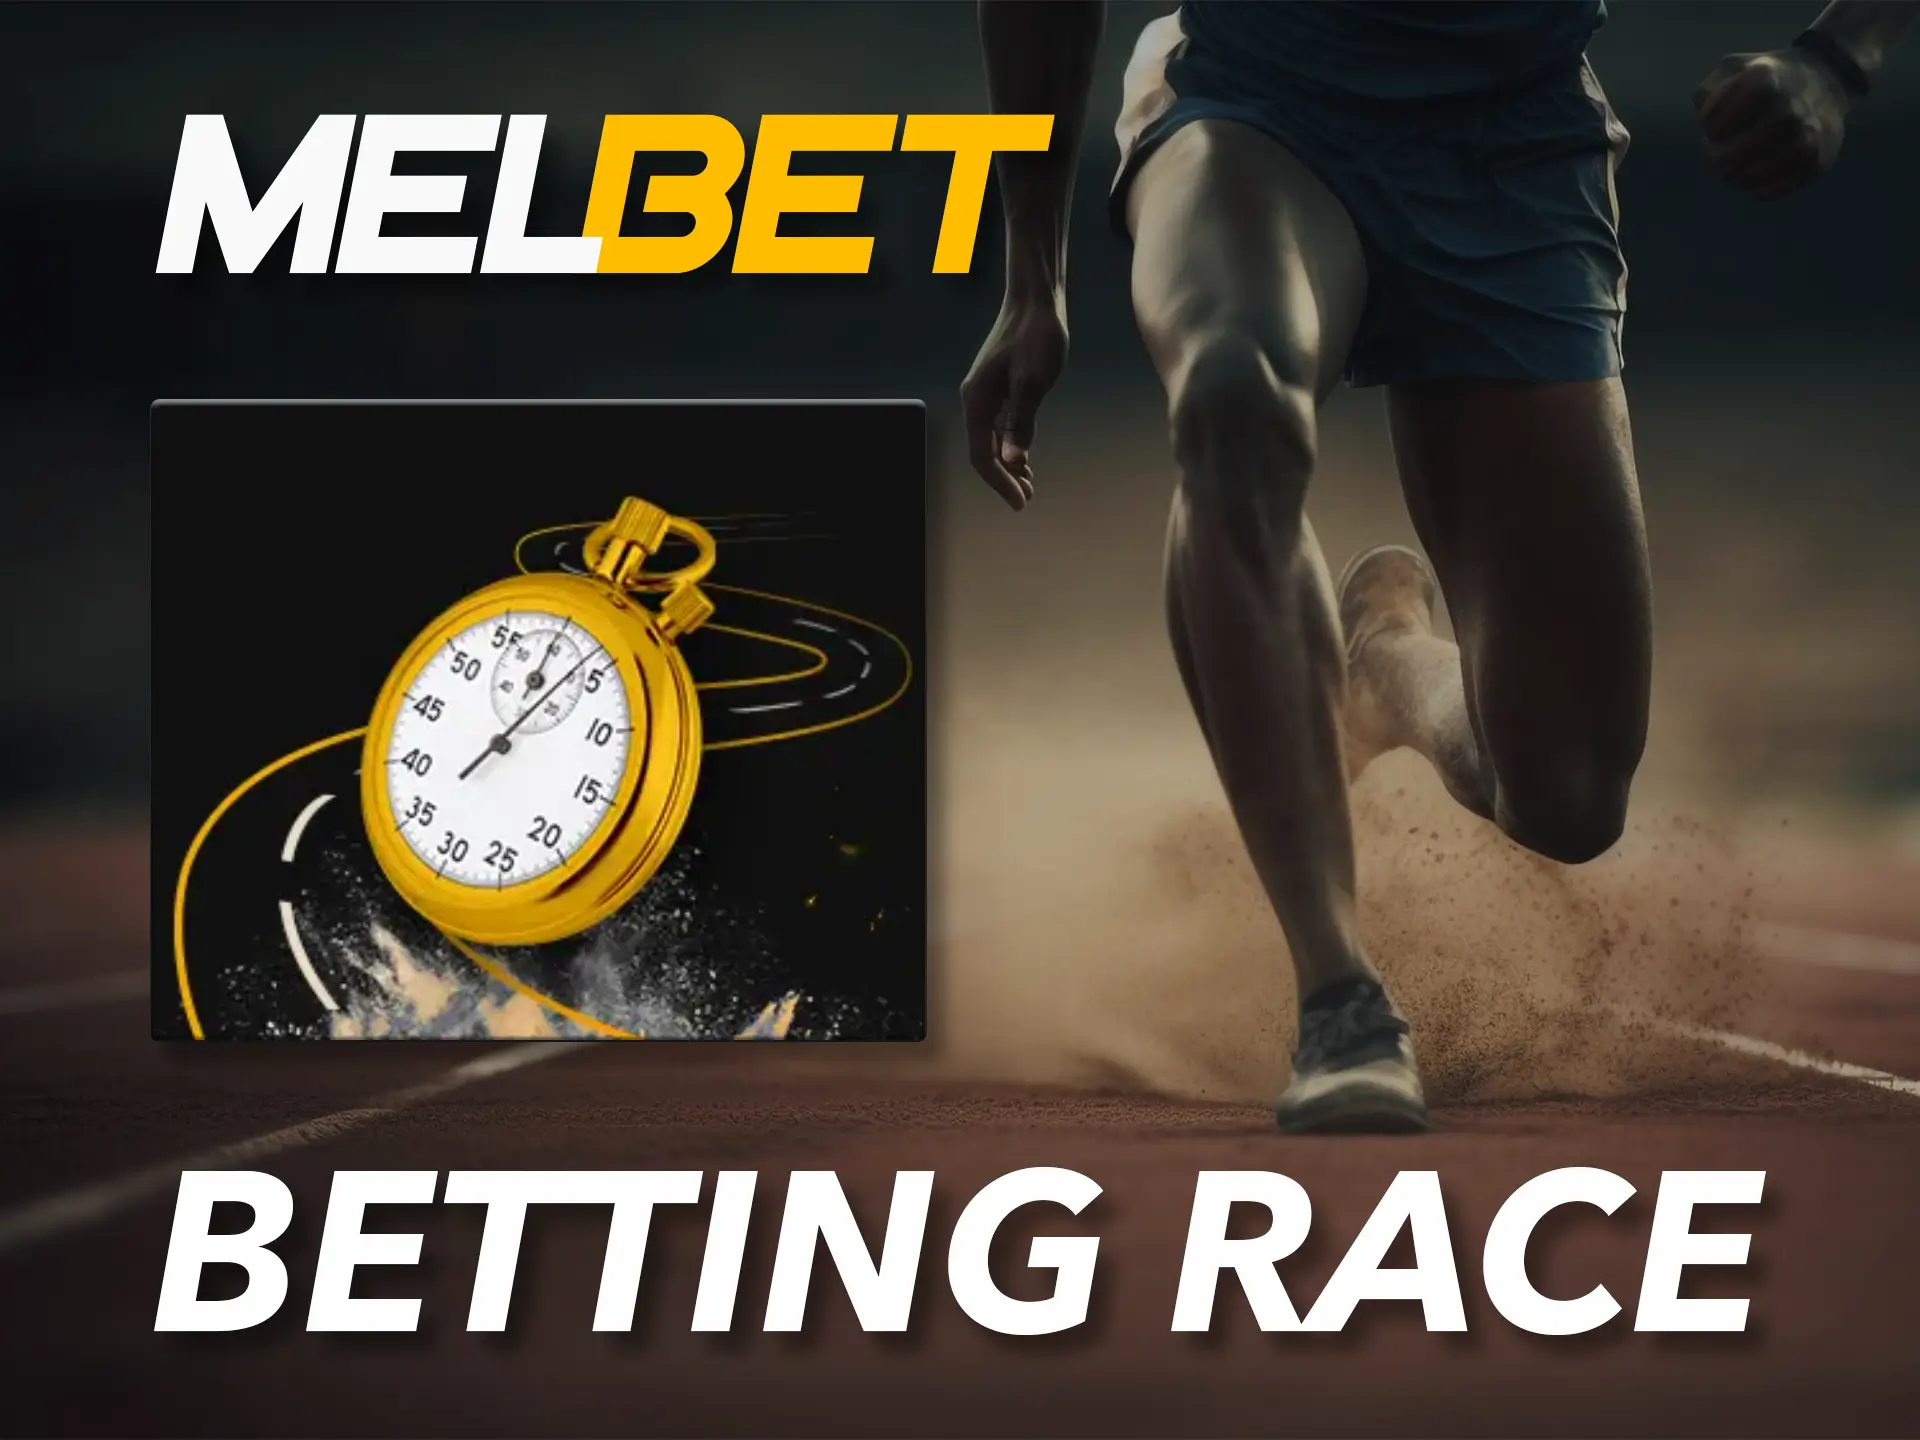 Compete with other Melbet Casino players to achieve successful outcomes.